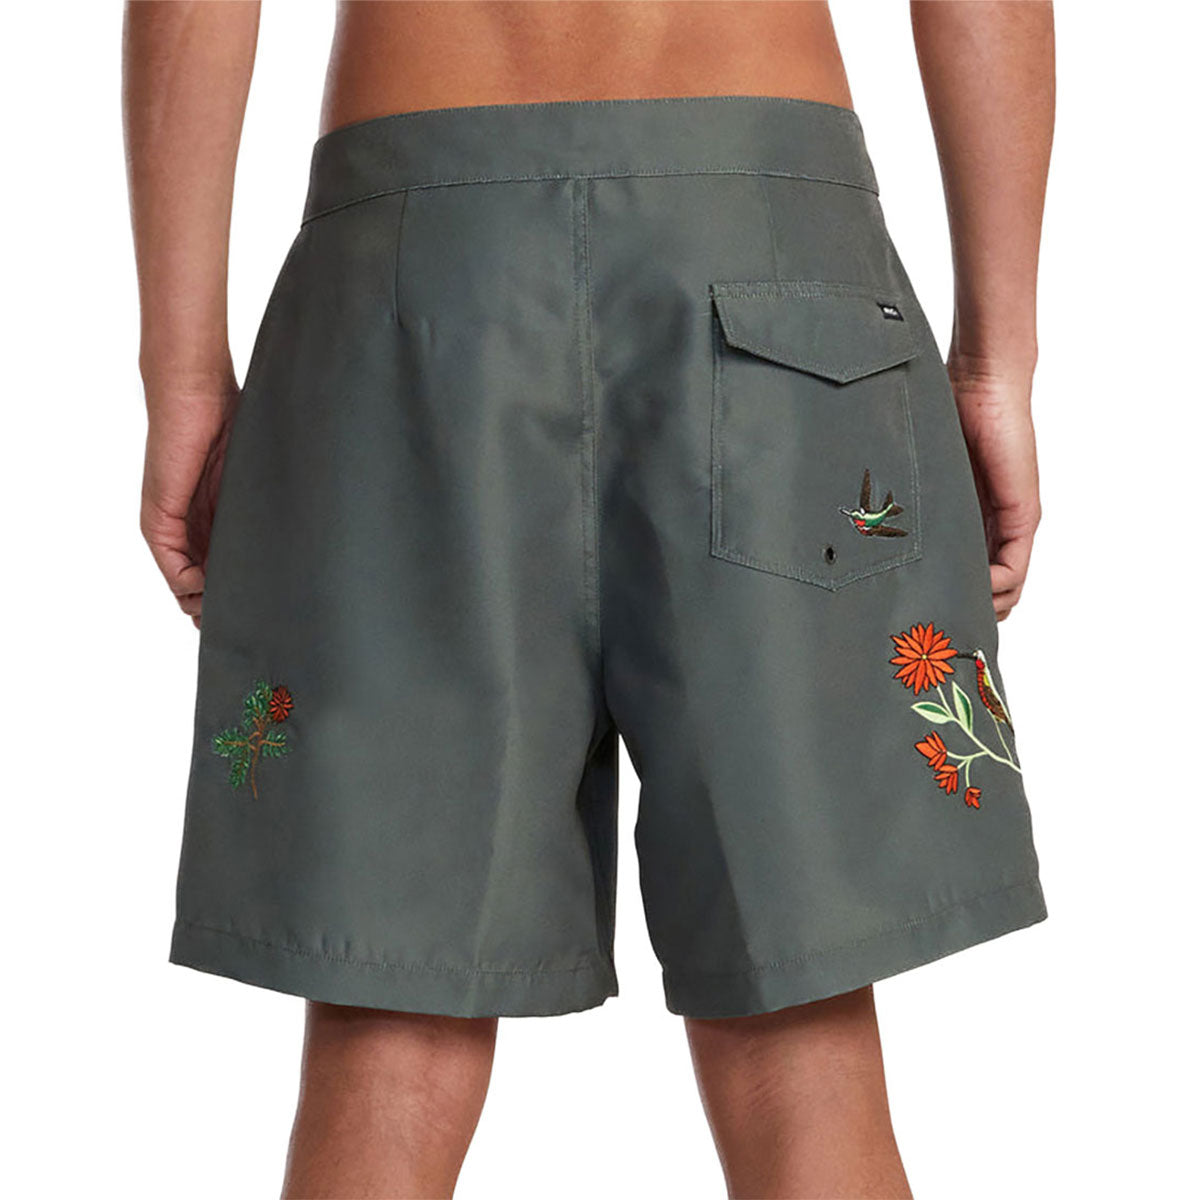 RVCA Anytime Board Shorts - Olive image 3